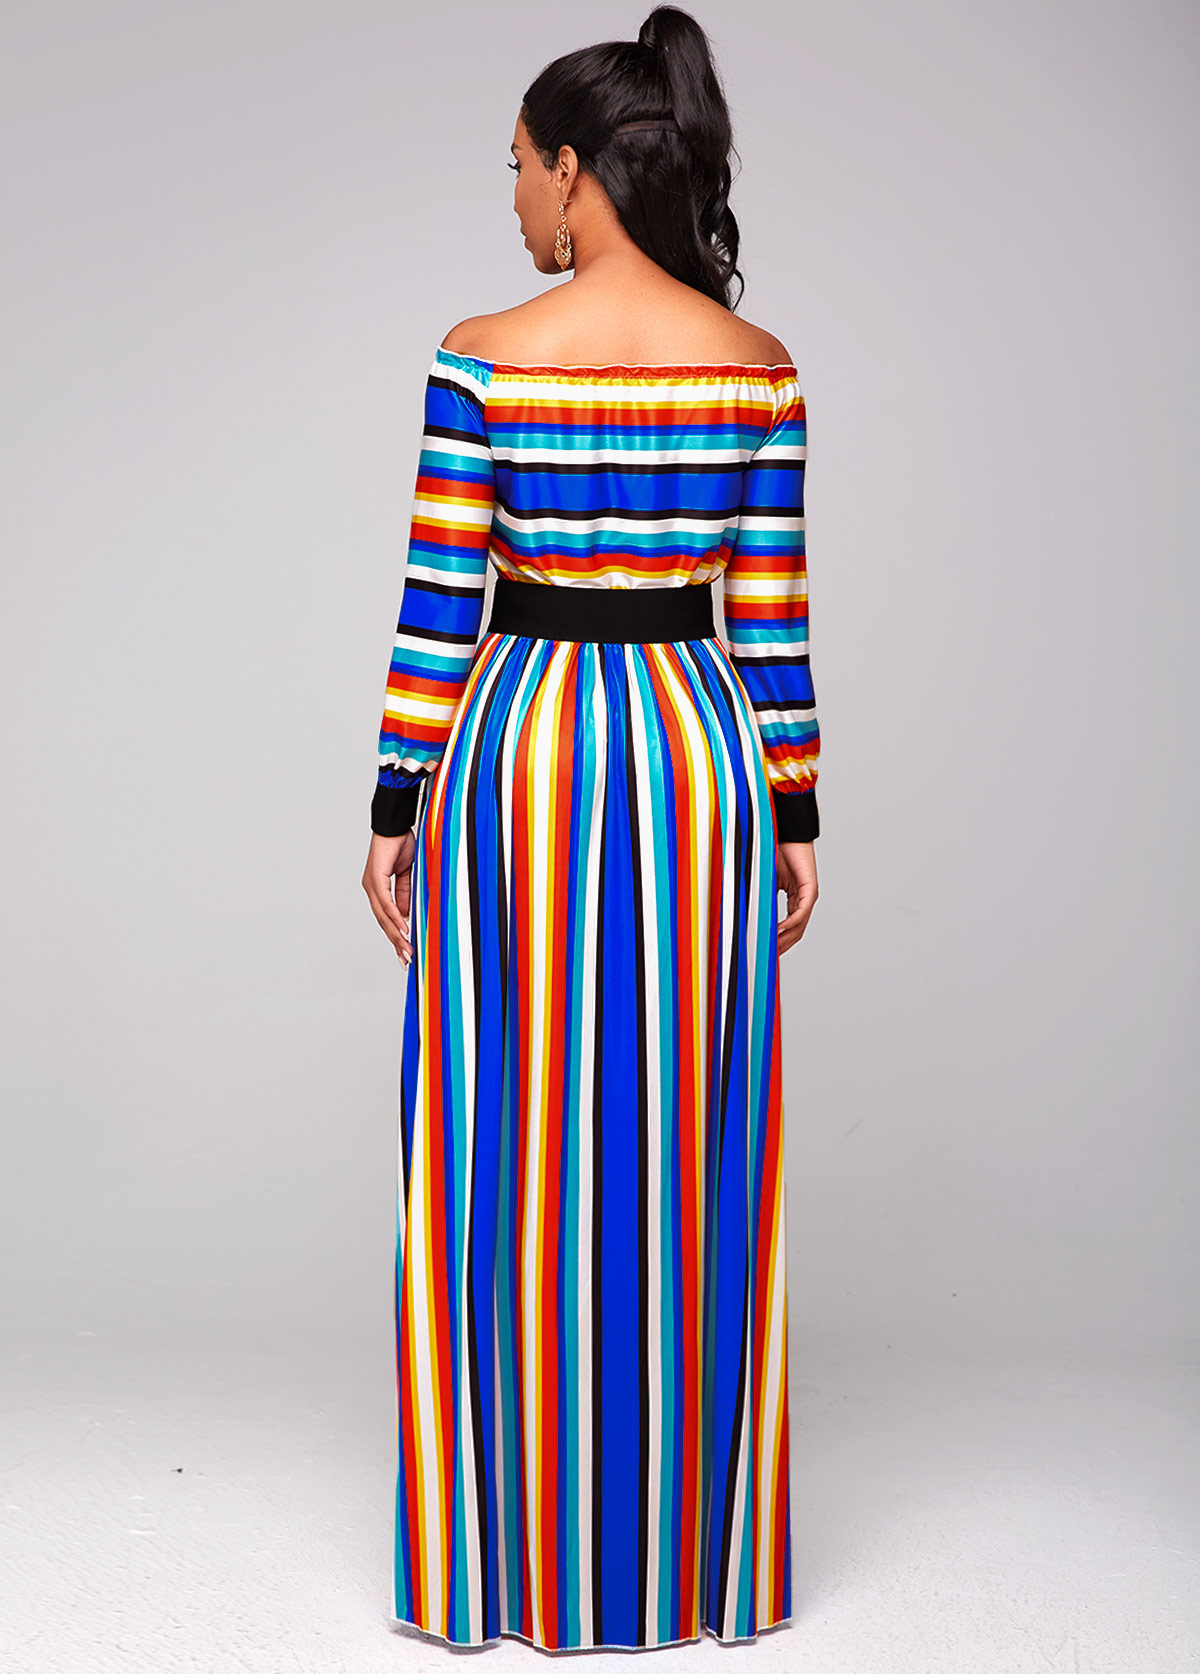 Off Shoulder Top and Rainbow Color Striped Skirt